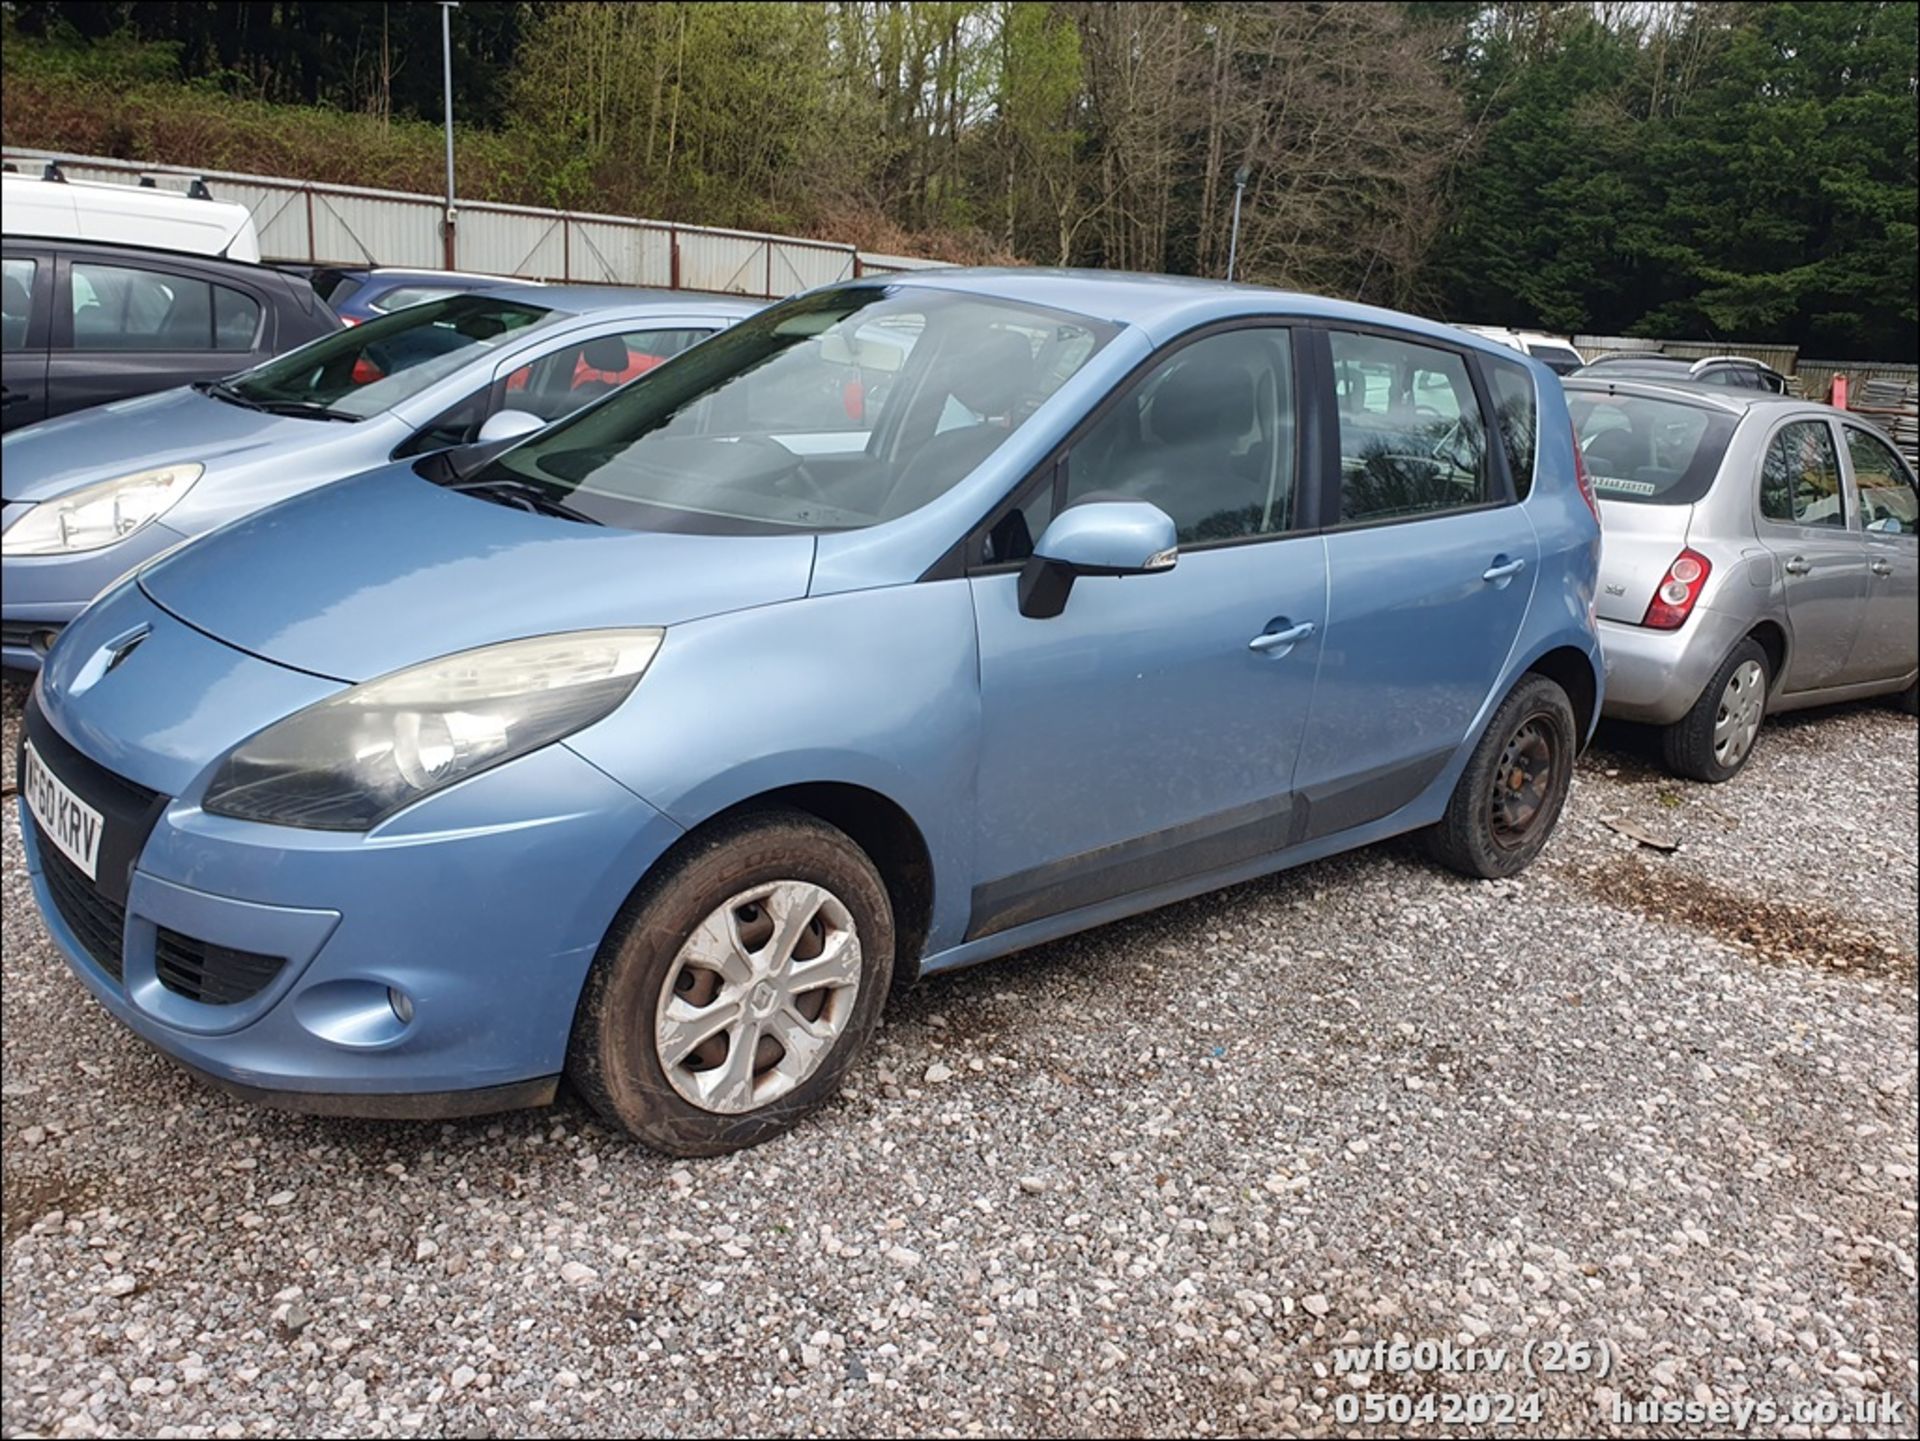 10/60 RENAULT SCENIC EXPRESSION DCI 105 - 1461cc 5dr MPV (Blue) - Image 27 of 50